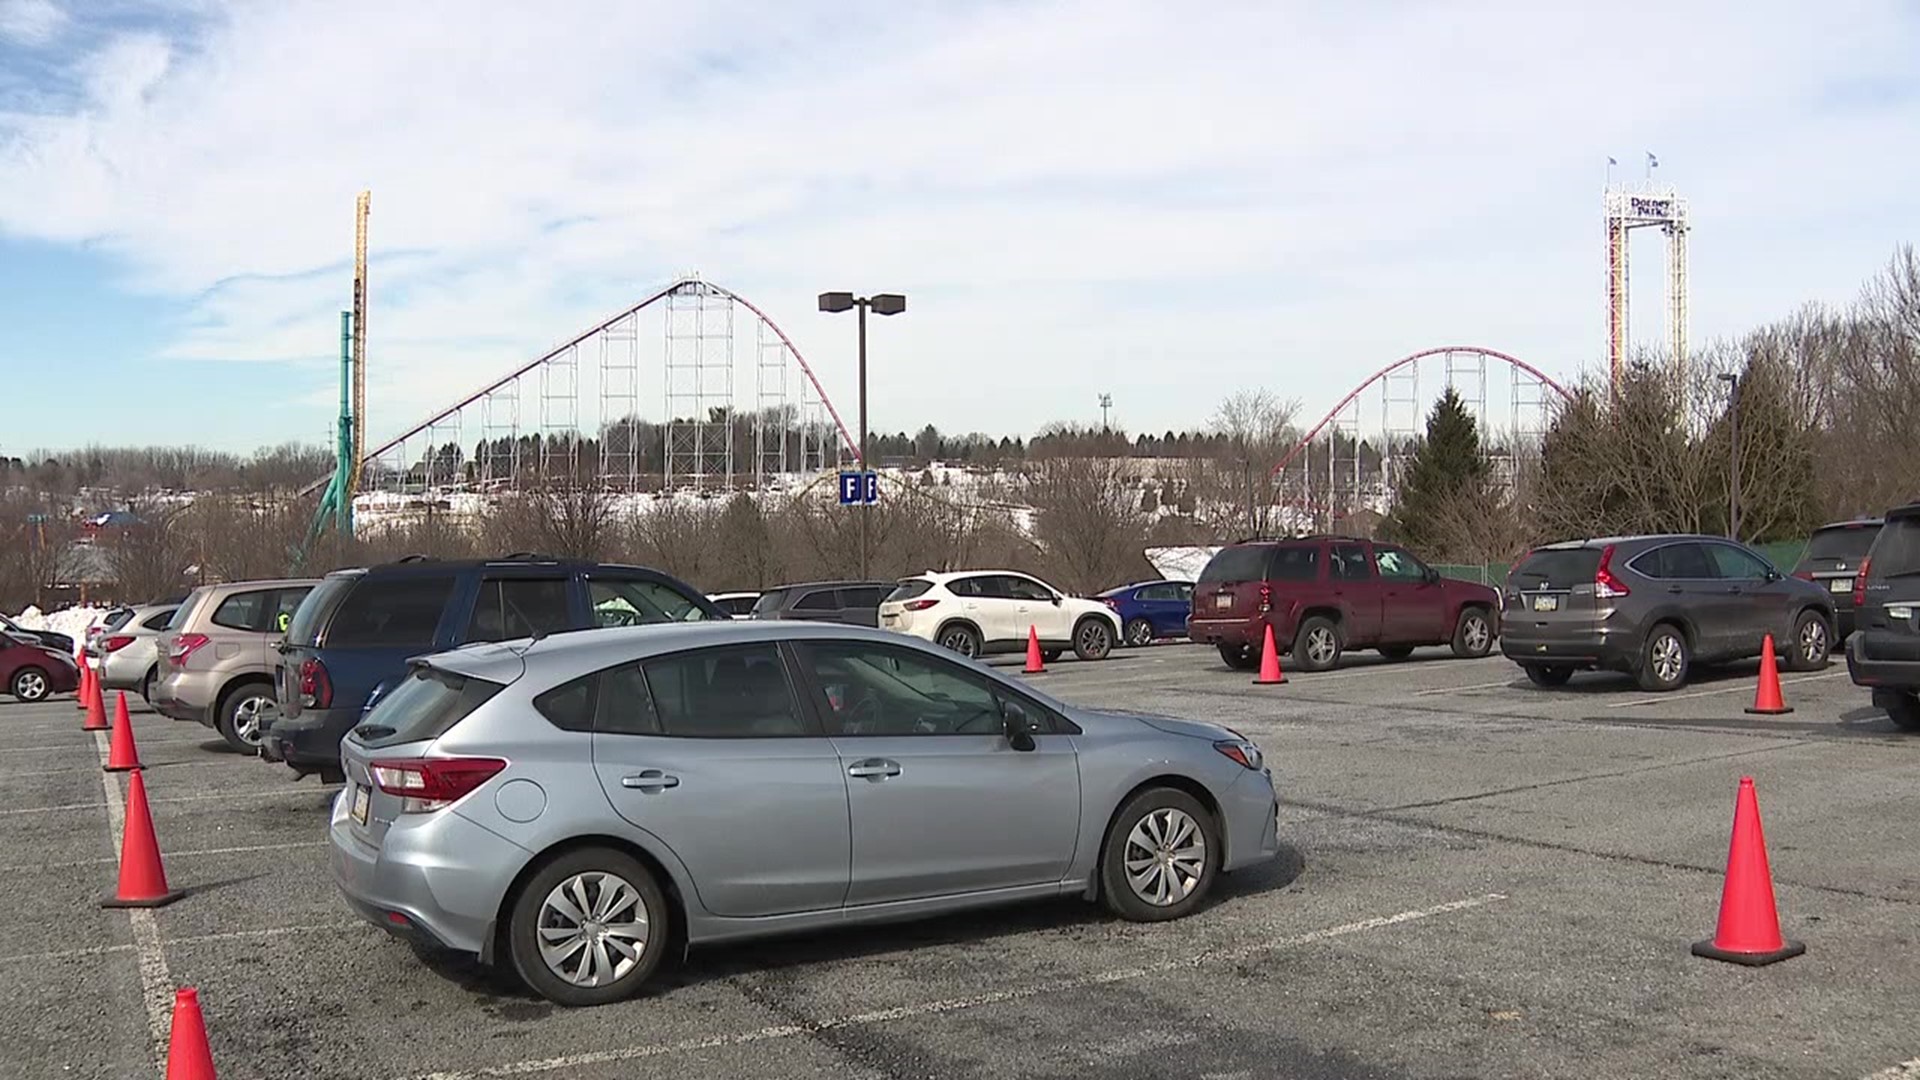 One thousand people got their second dose of Moderna's COVID-19 vaccine on Wednesday at the amusement park in the Lehigh Valley.